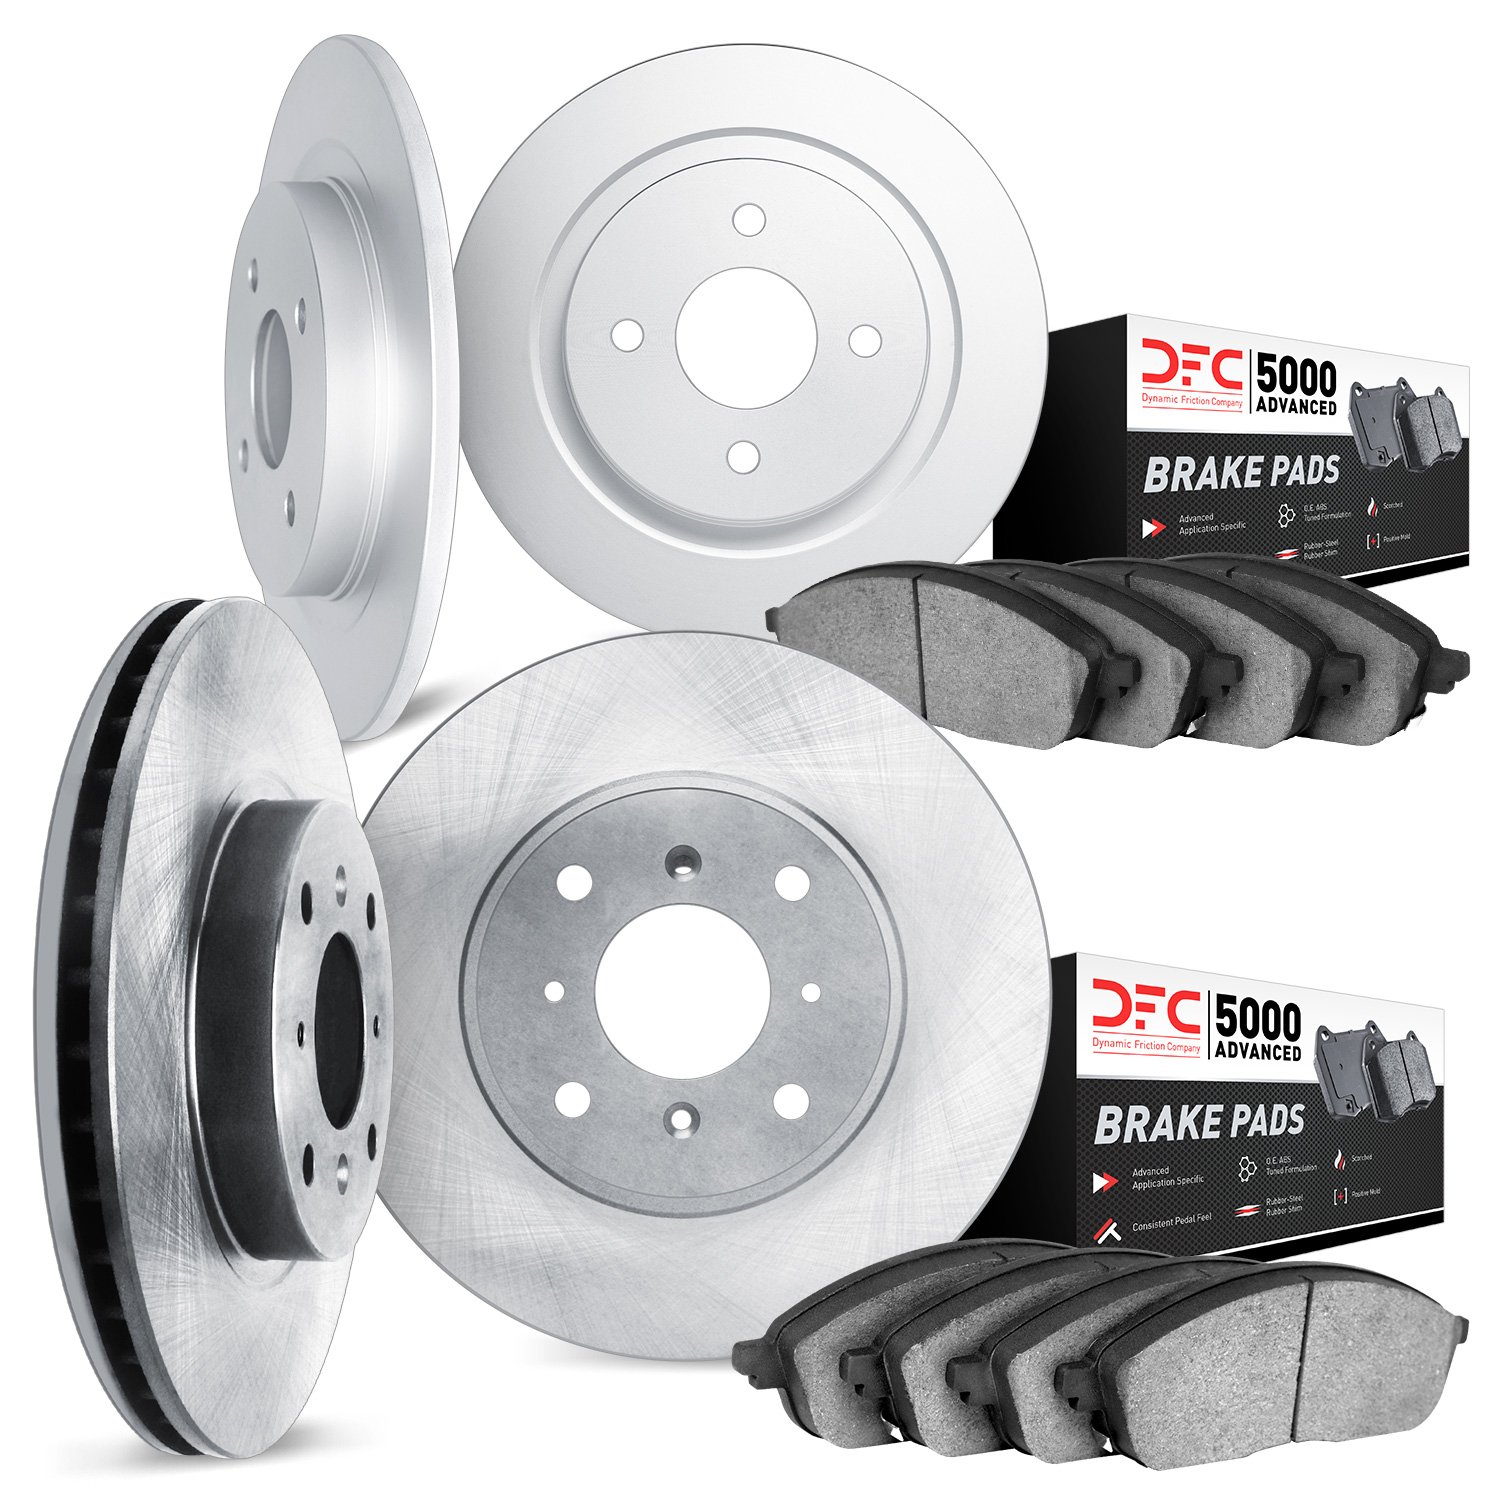 6504-28004 Brake Rotors w/5000 Advanced Brake Pads Kit, 1977-1989 Peugeot, Position: Front and Rear